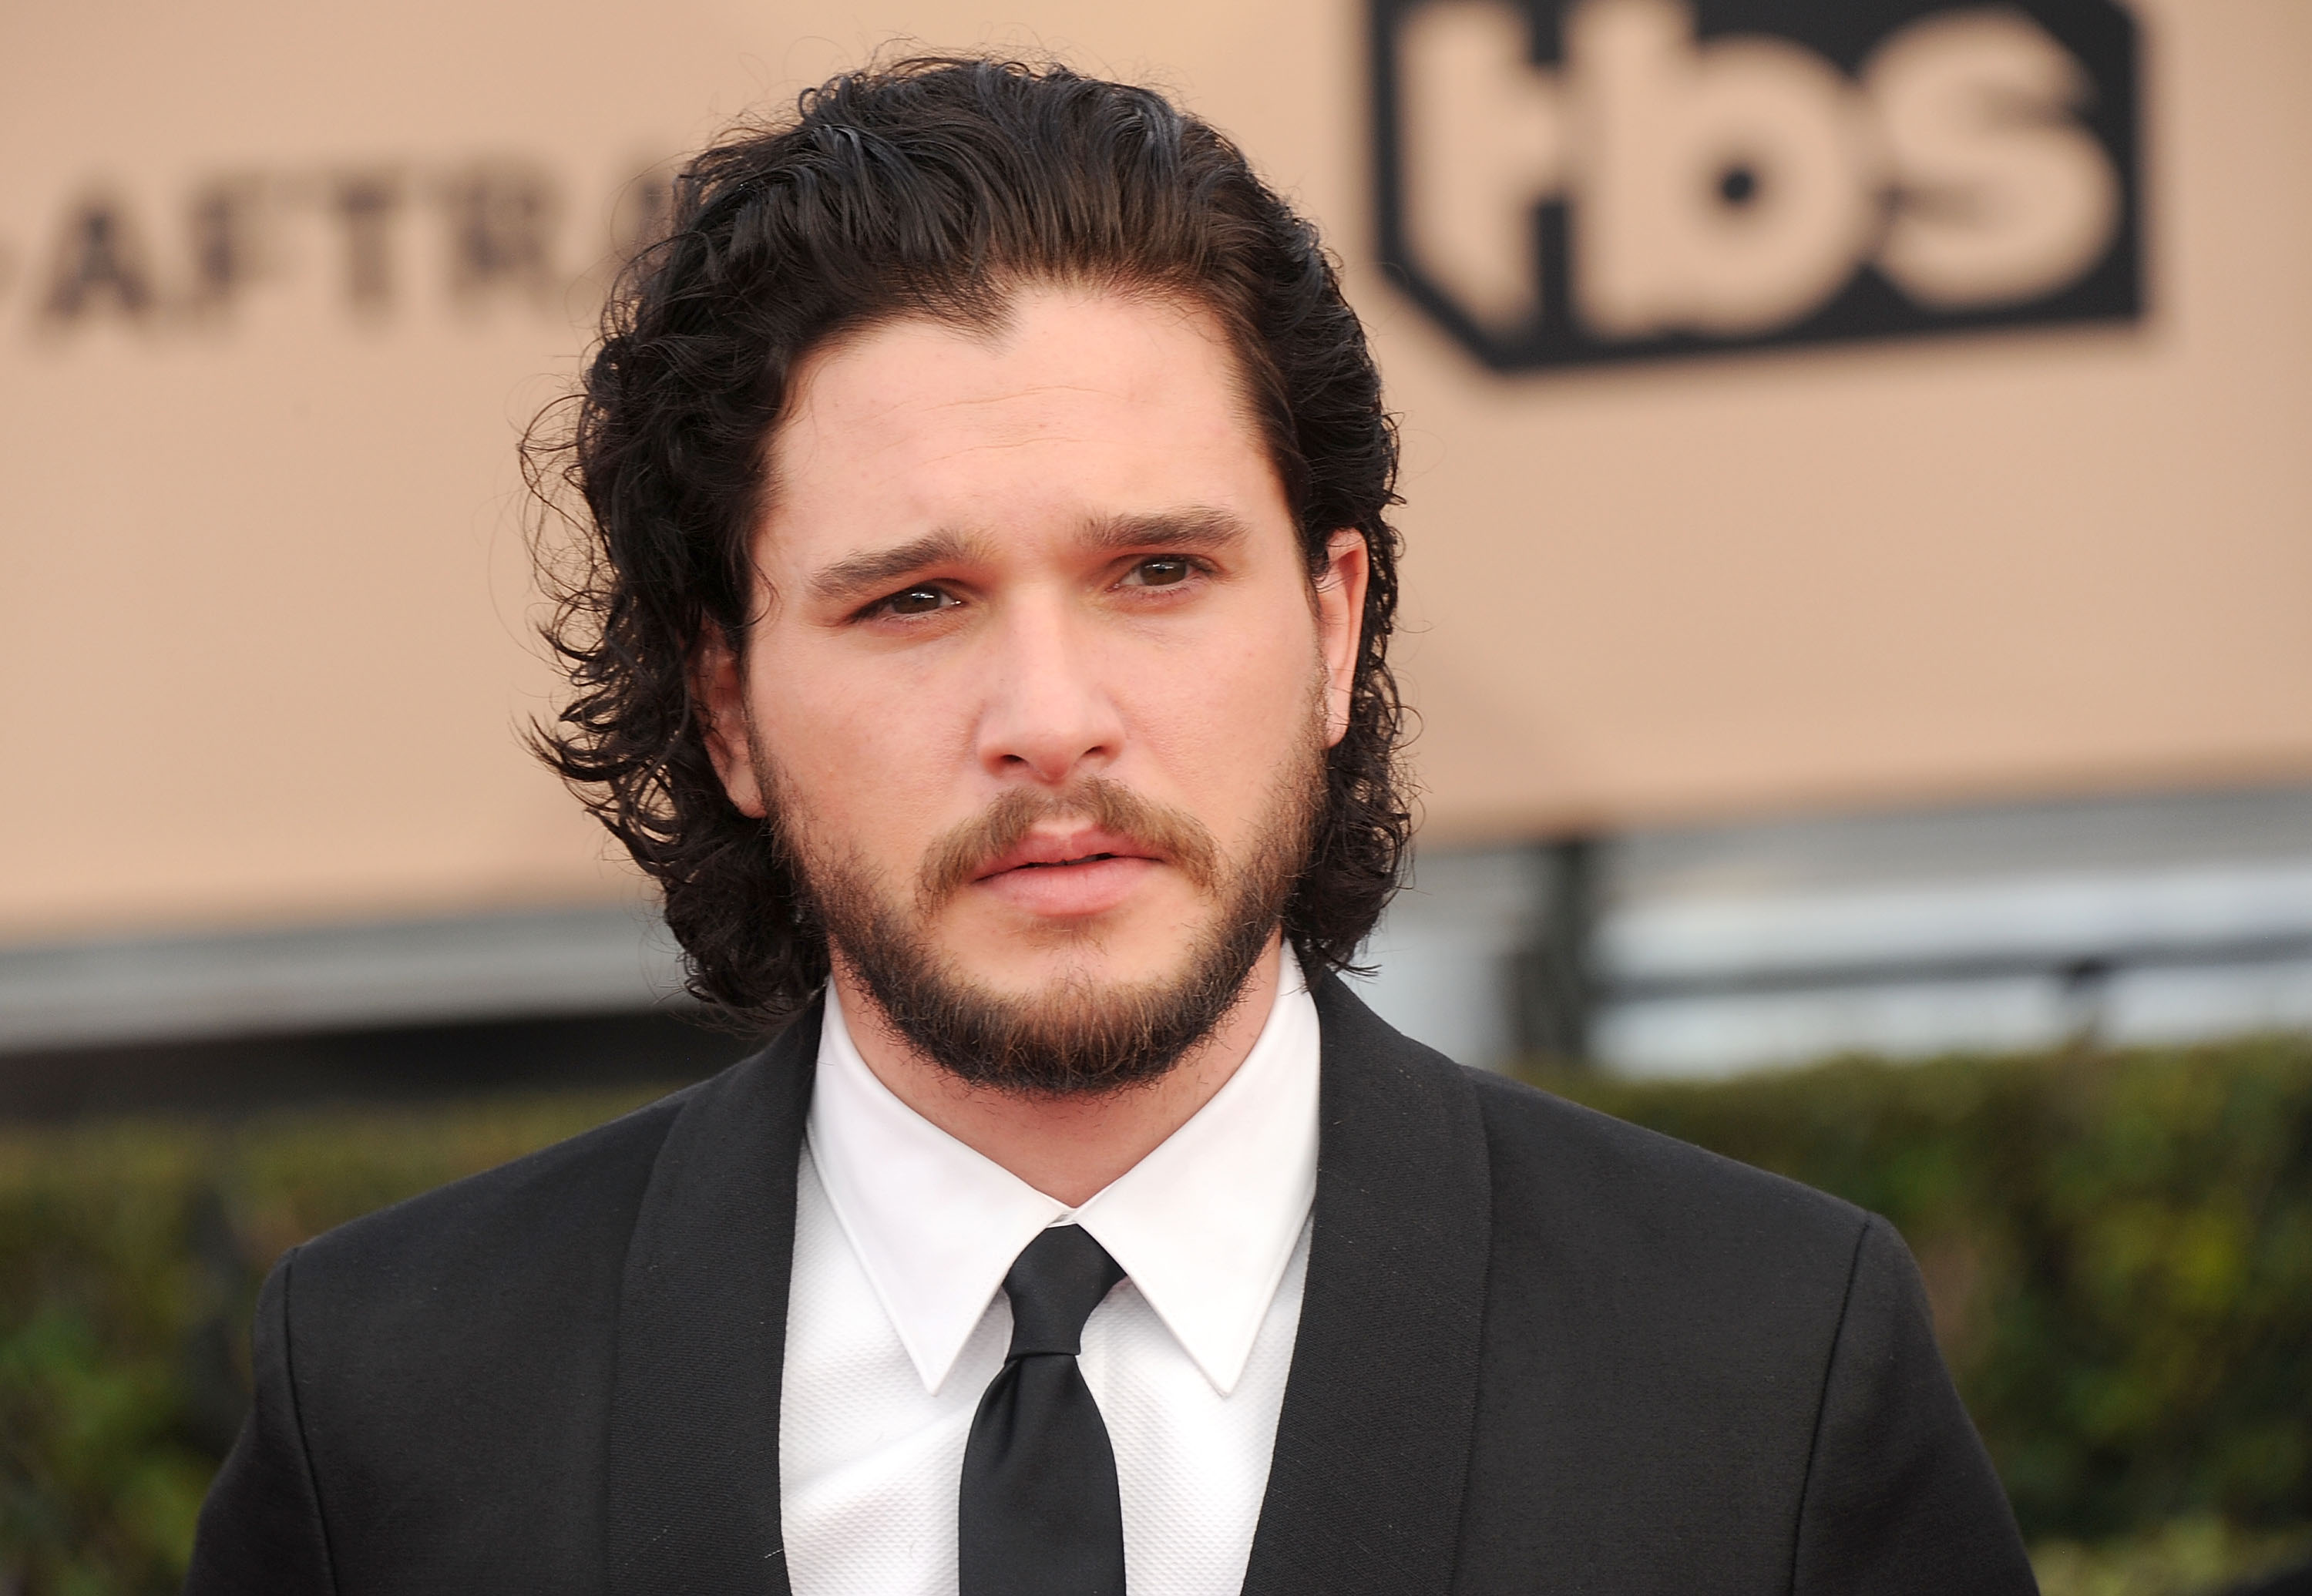 Actor Kit Harington arrives at the 22nd Annual Screen Actors Guild Awards at The Shrine Auditorium on January 30, 2016 in Los Angeles, California. (Gregg DeGuire&mdash;WireImage/Getty Images)